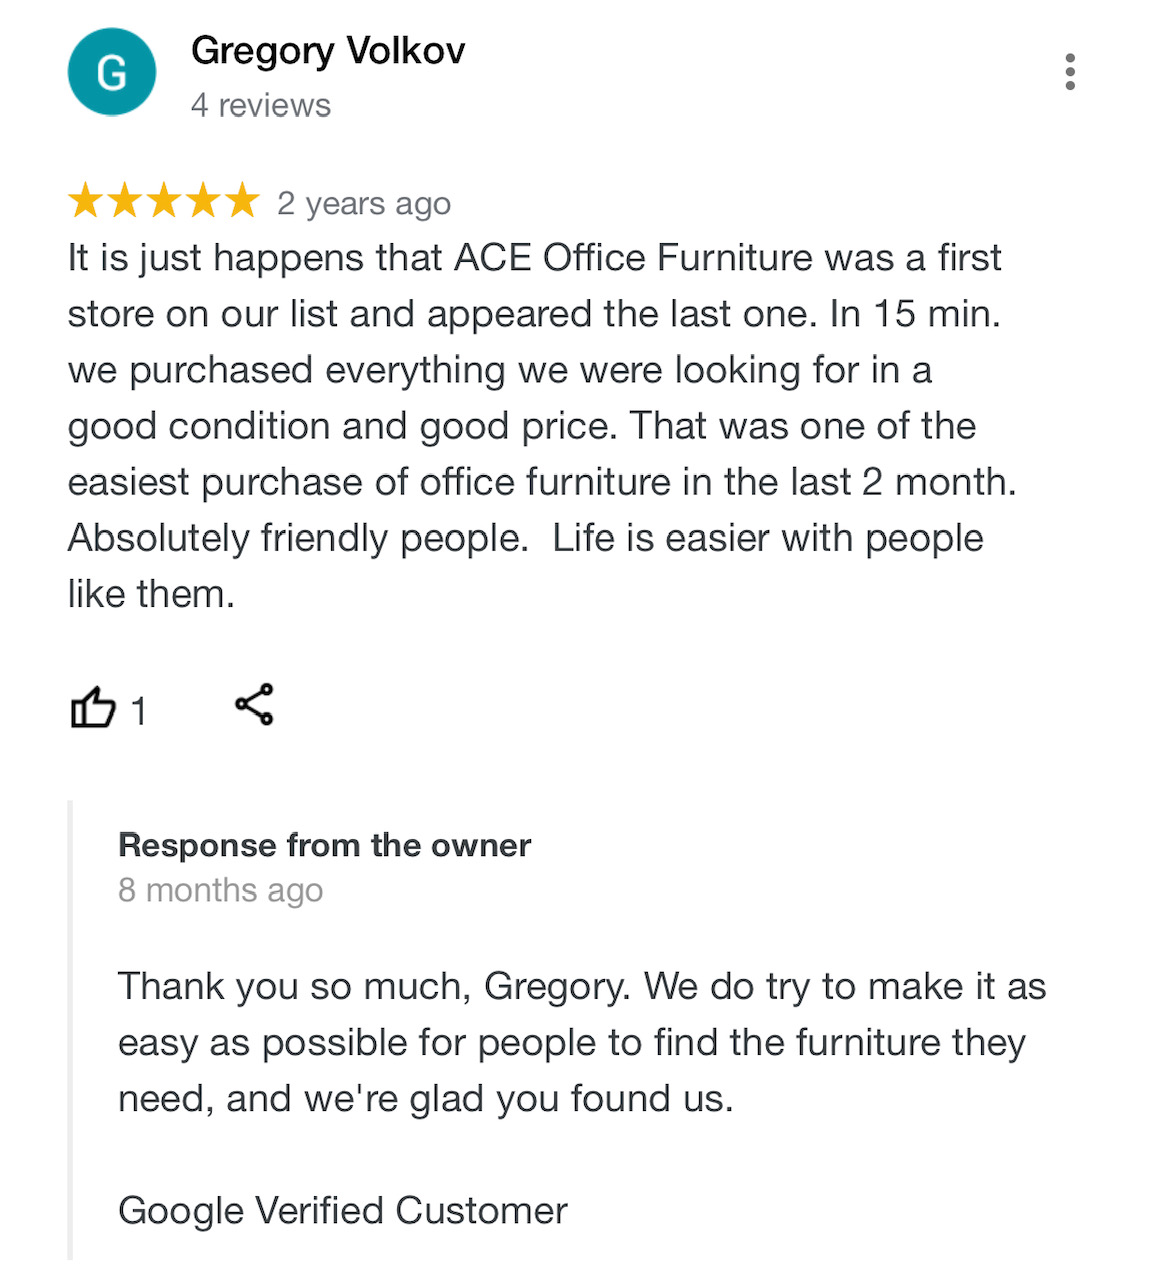 It is just happens that ACE Office Furniture was a first store on our list and appeared the last one. In 15 min. We purchased everything we were looking for in a good condition and good price. That was one of the easiest purchases of office furniture in the last 2 month. Absolutely Friendly people. Life is easier with people like them.